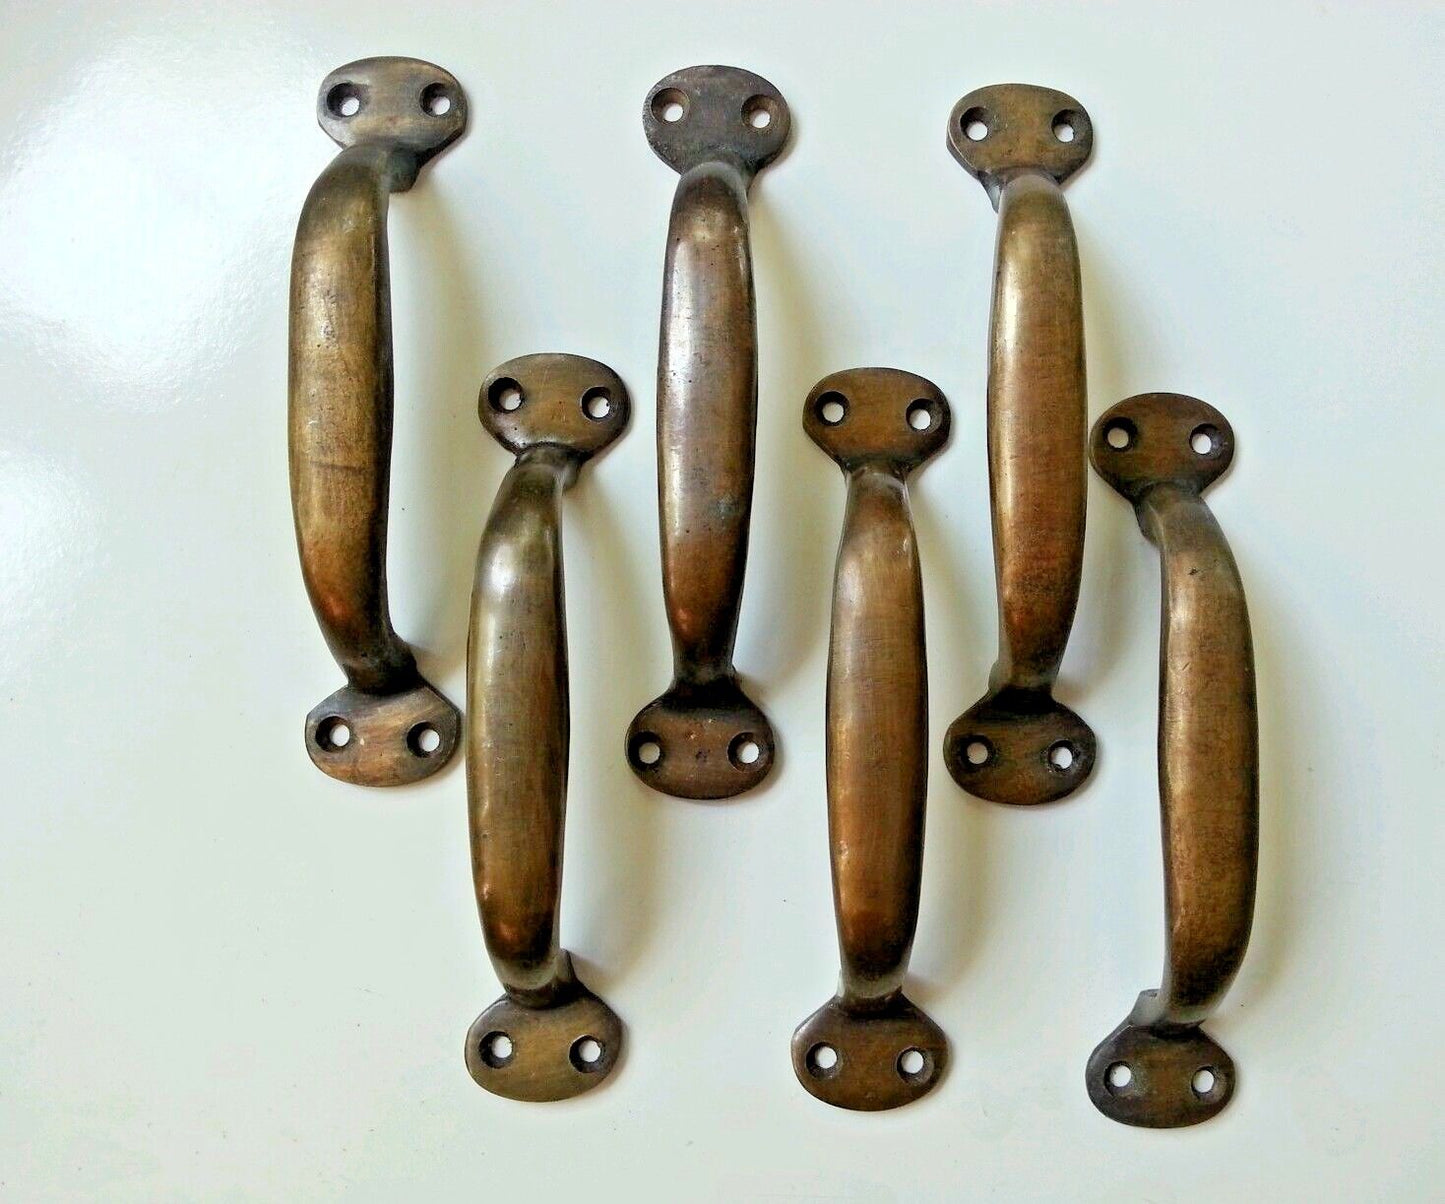 6 Solid Brass Ant. Style File Cabinet Trunk Chest Handles Pulls 5-1/2" wide #P1